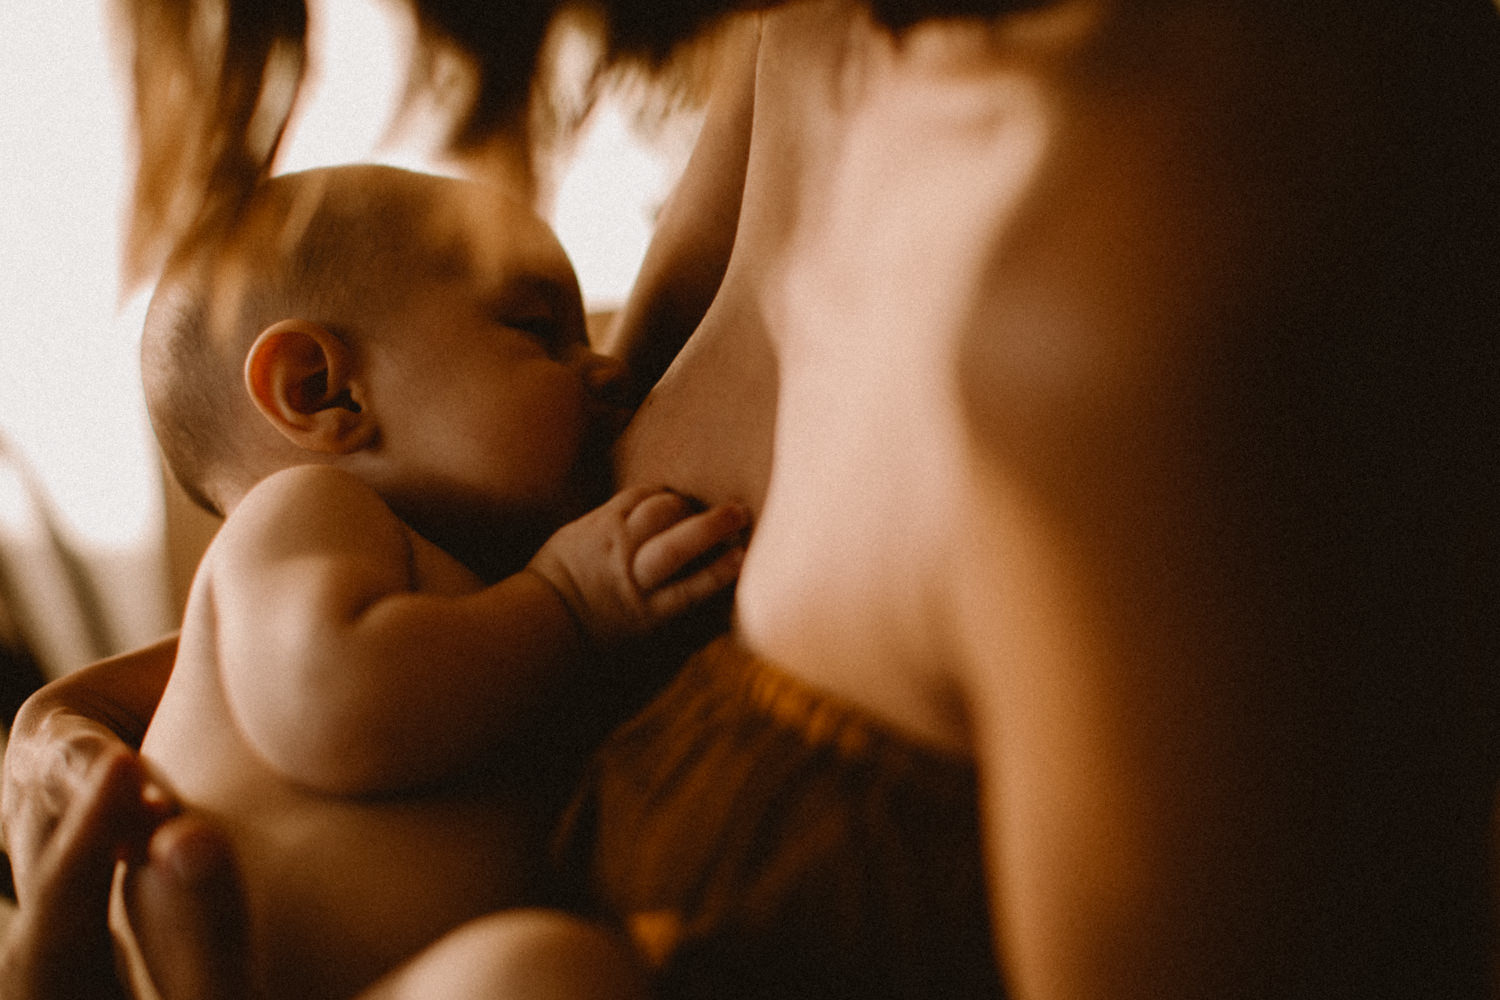 A Mother Baby Session And Breastfeeding Juli Etta Photographe